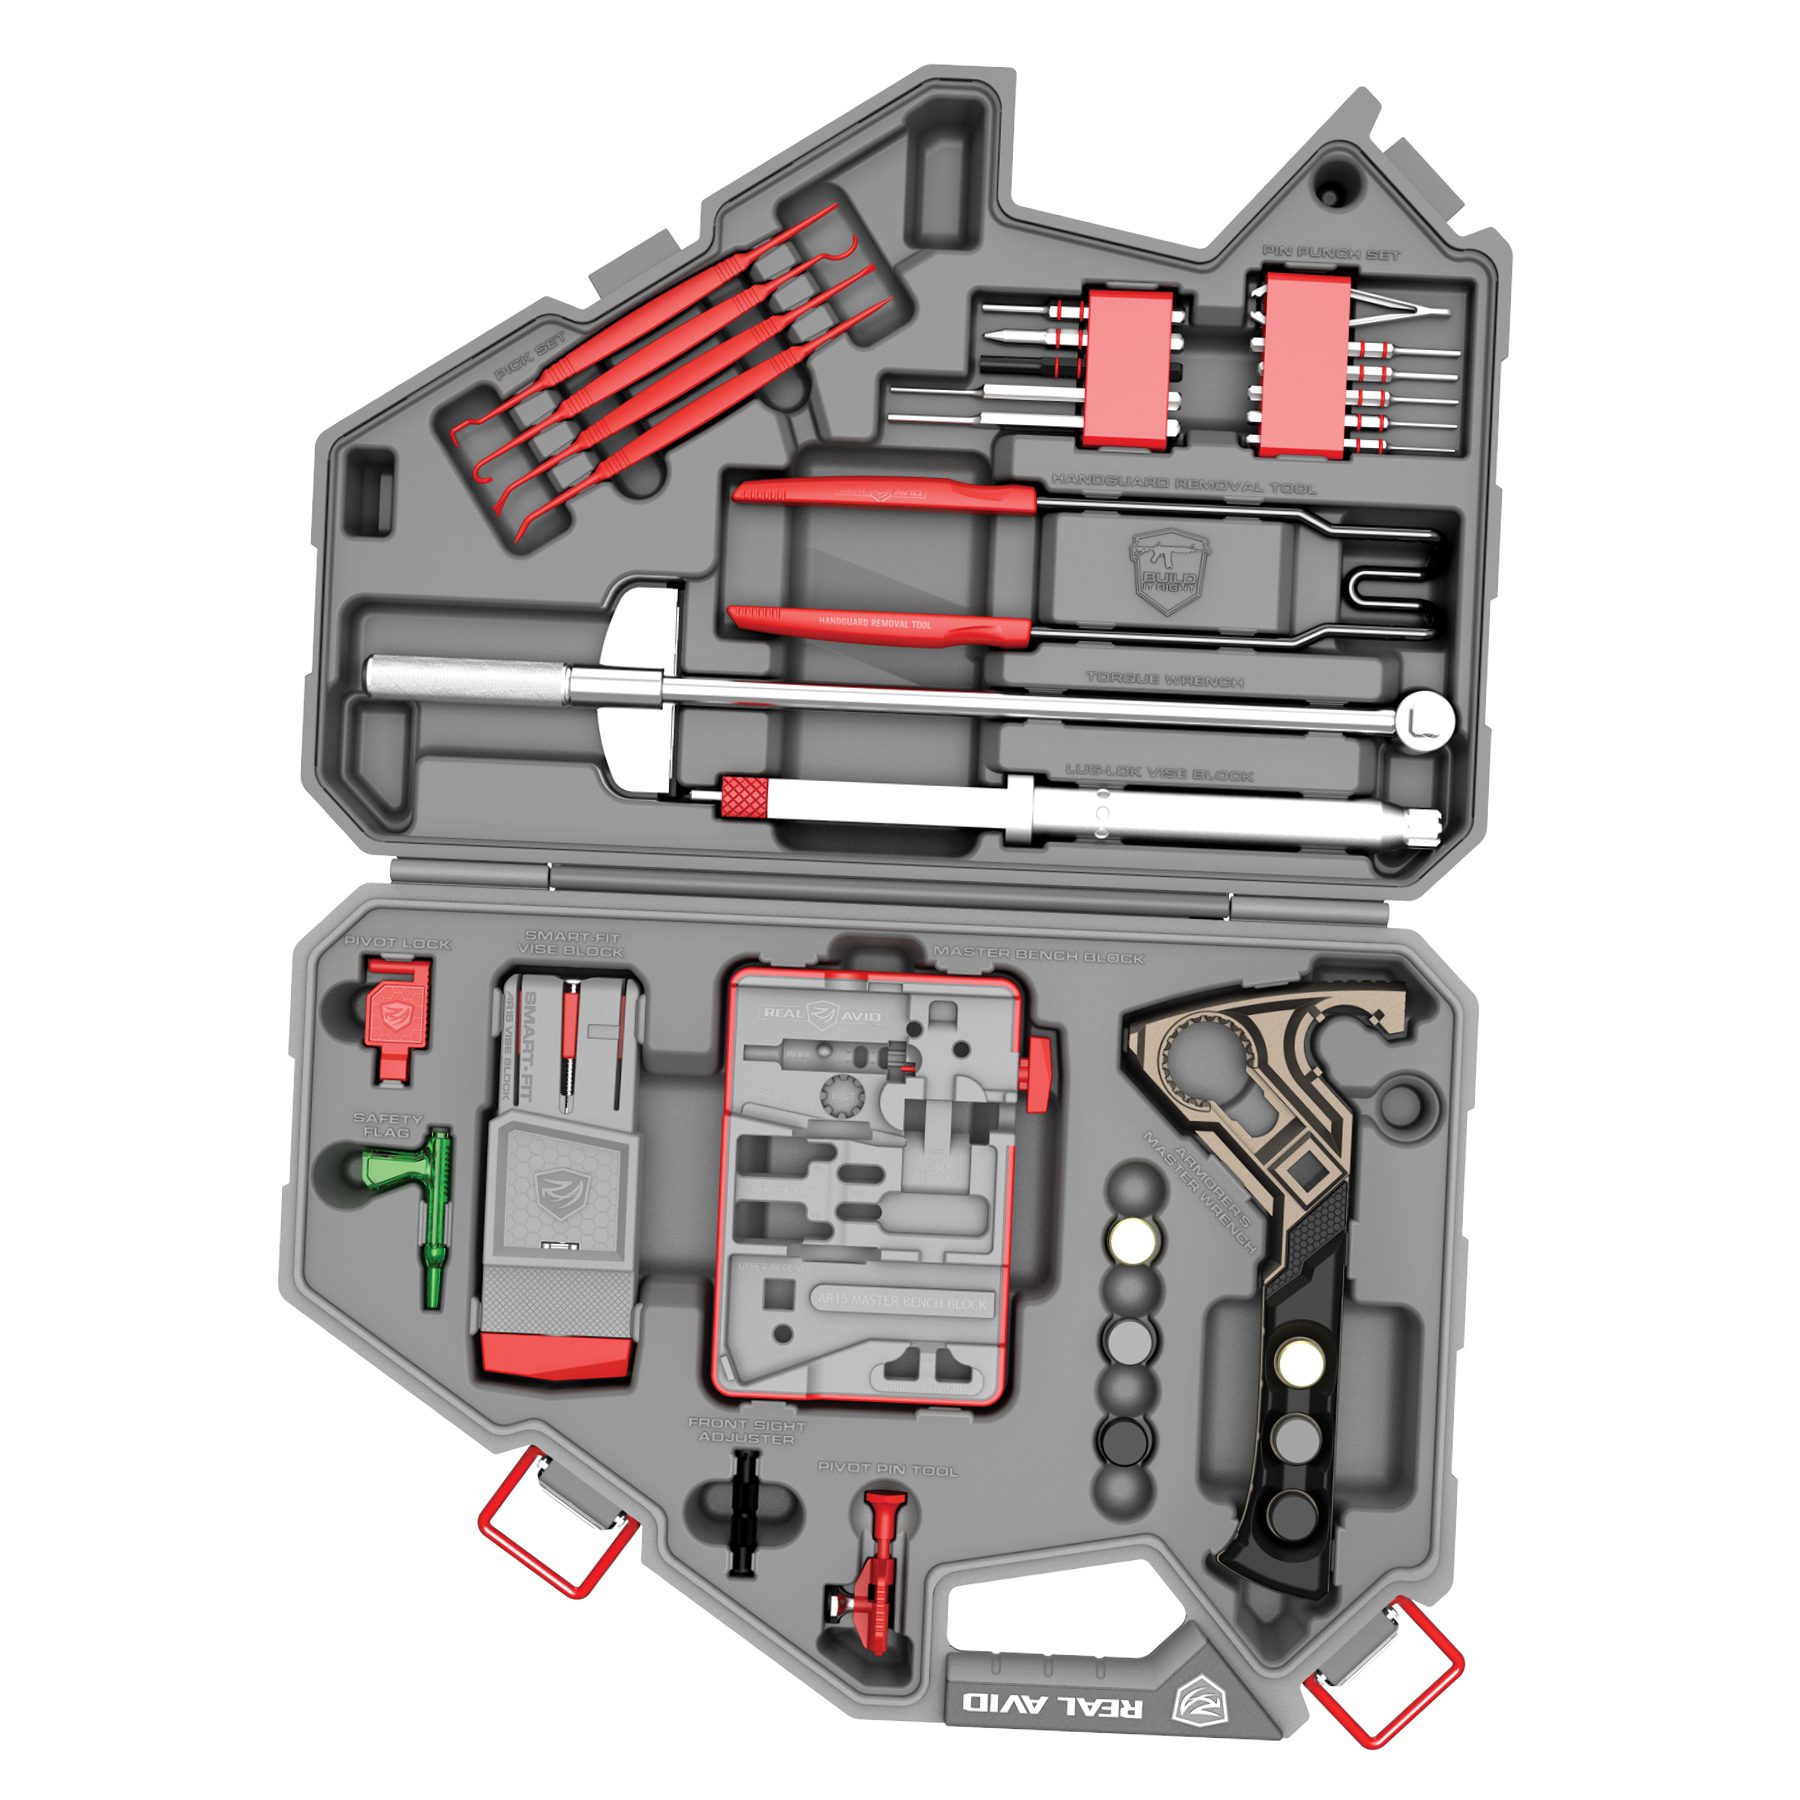 a tool kit with tools in it on a white background